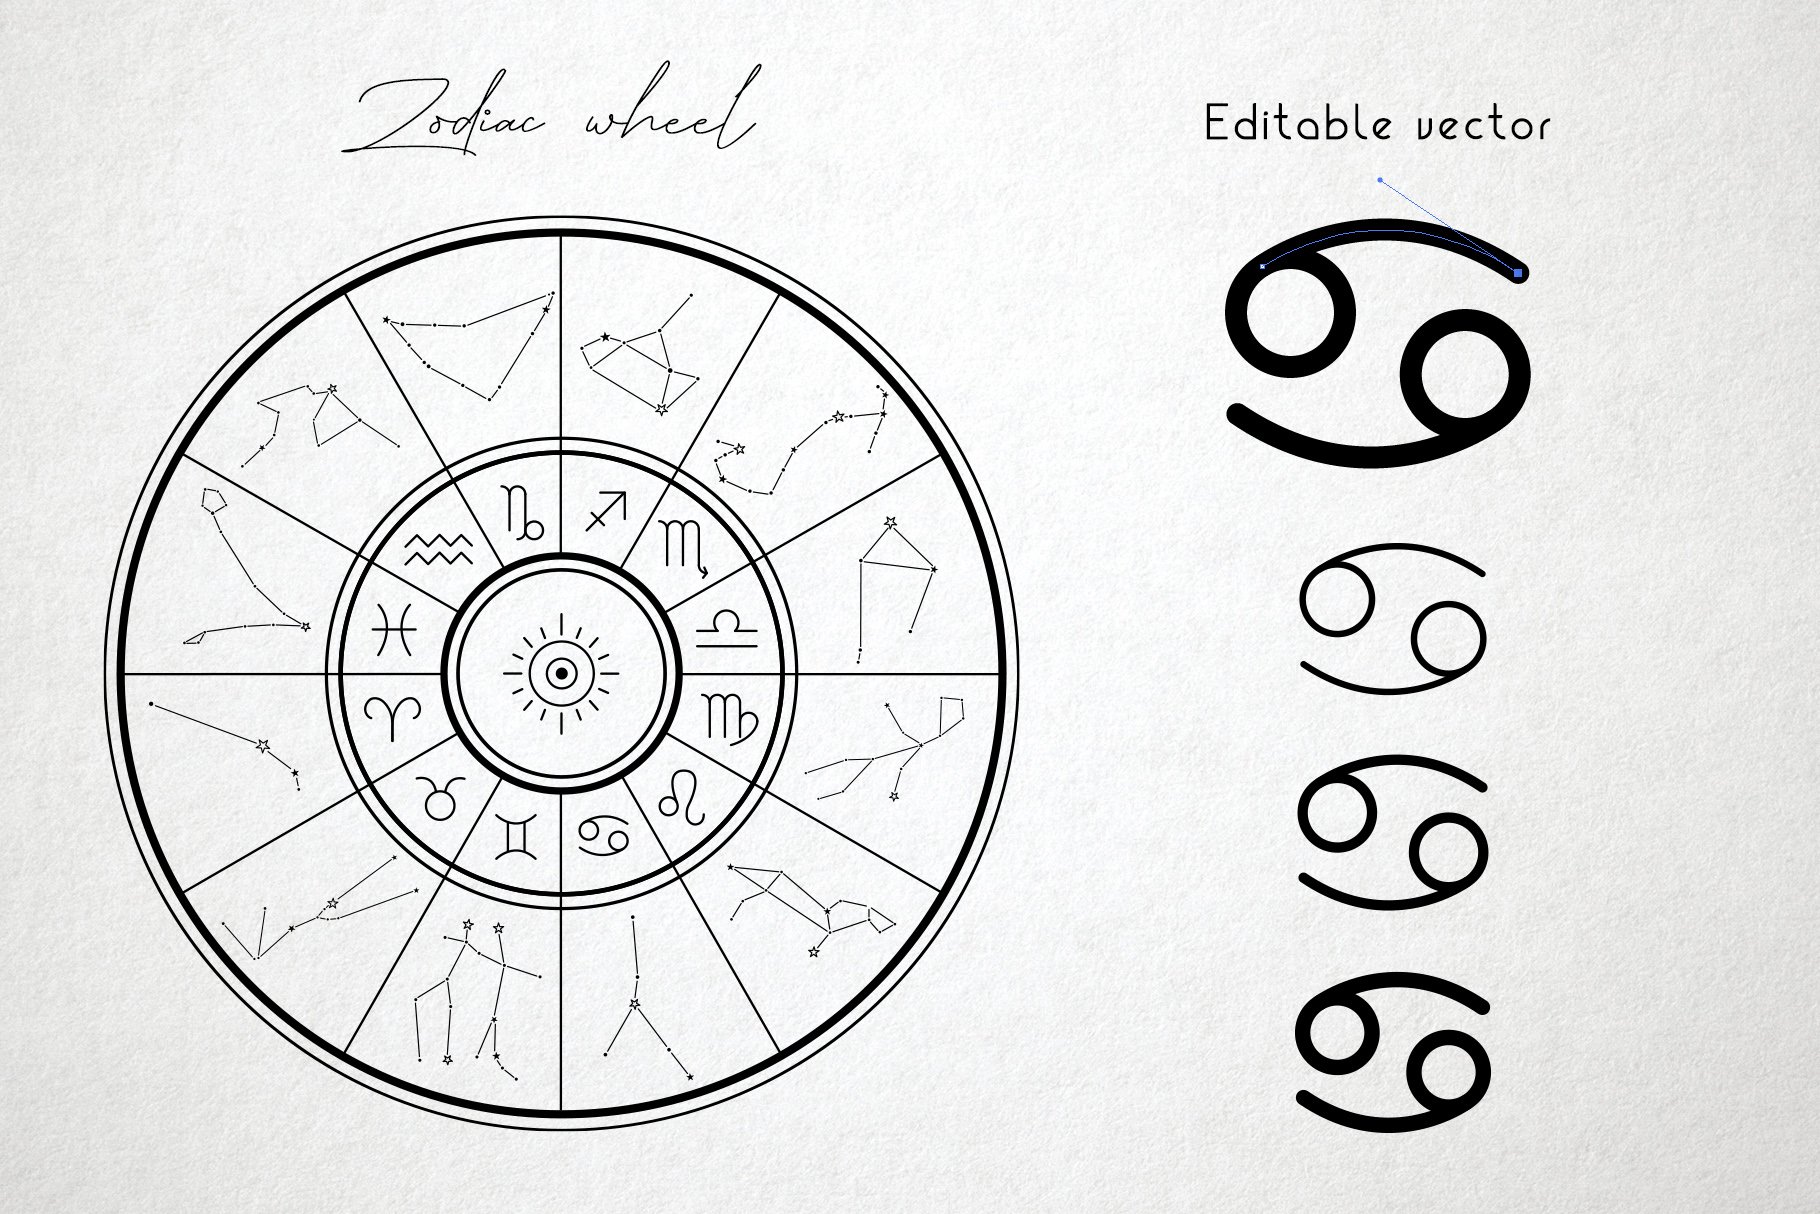 Laconic zodiac wheel with the most popular types of zodiacs.